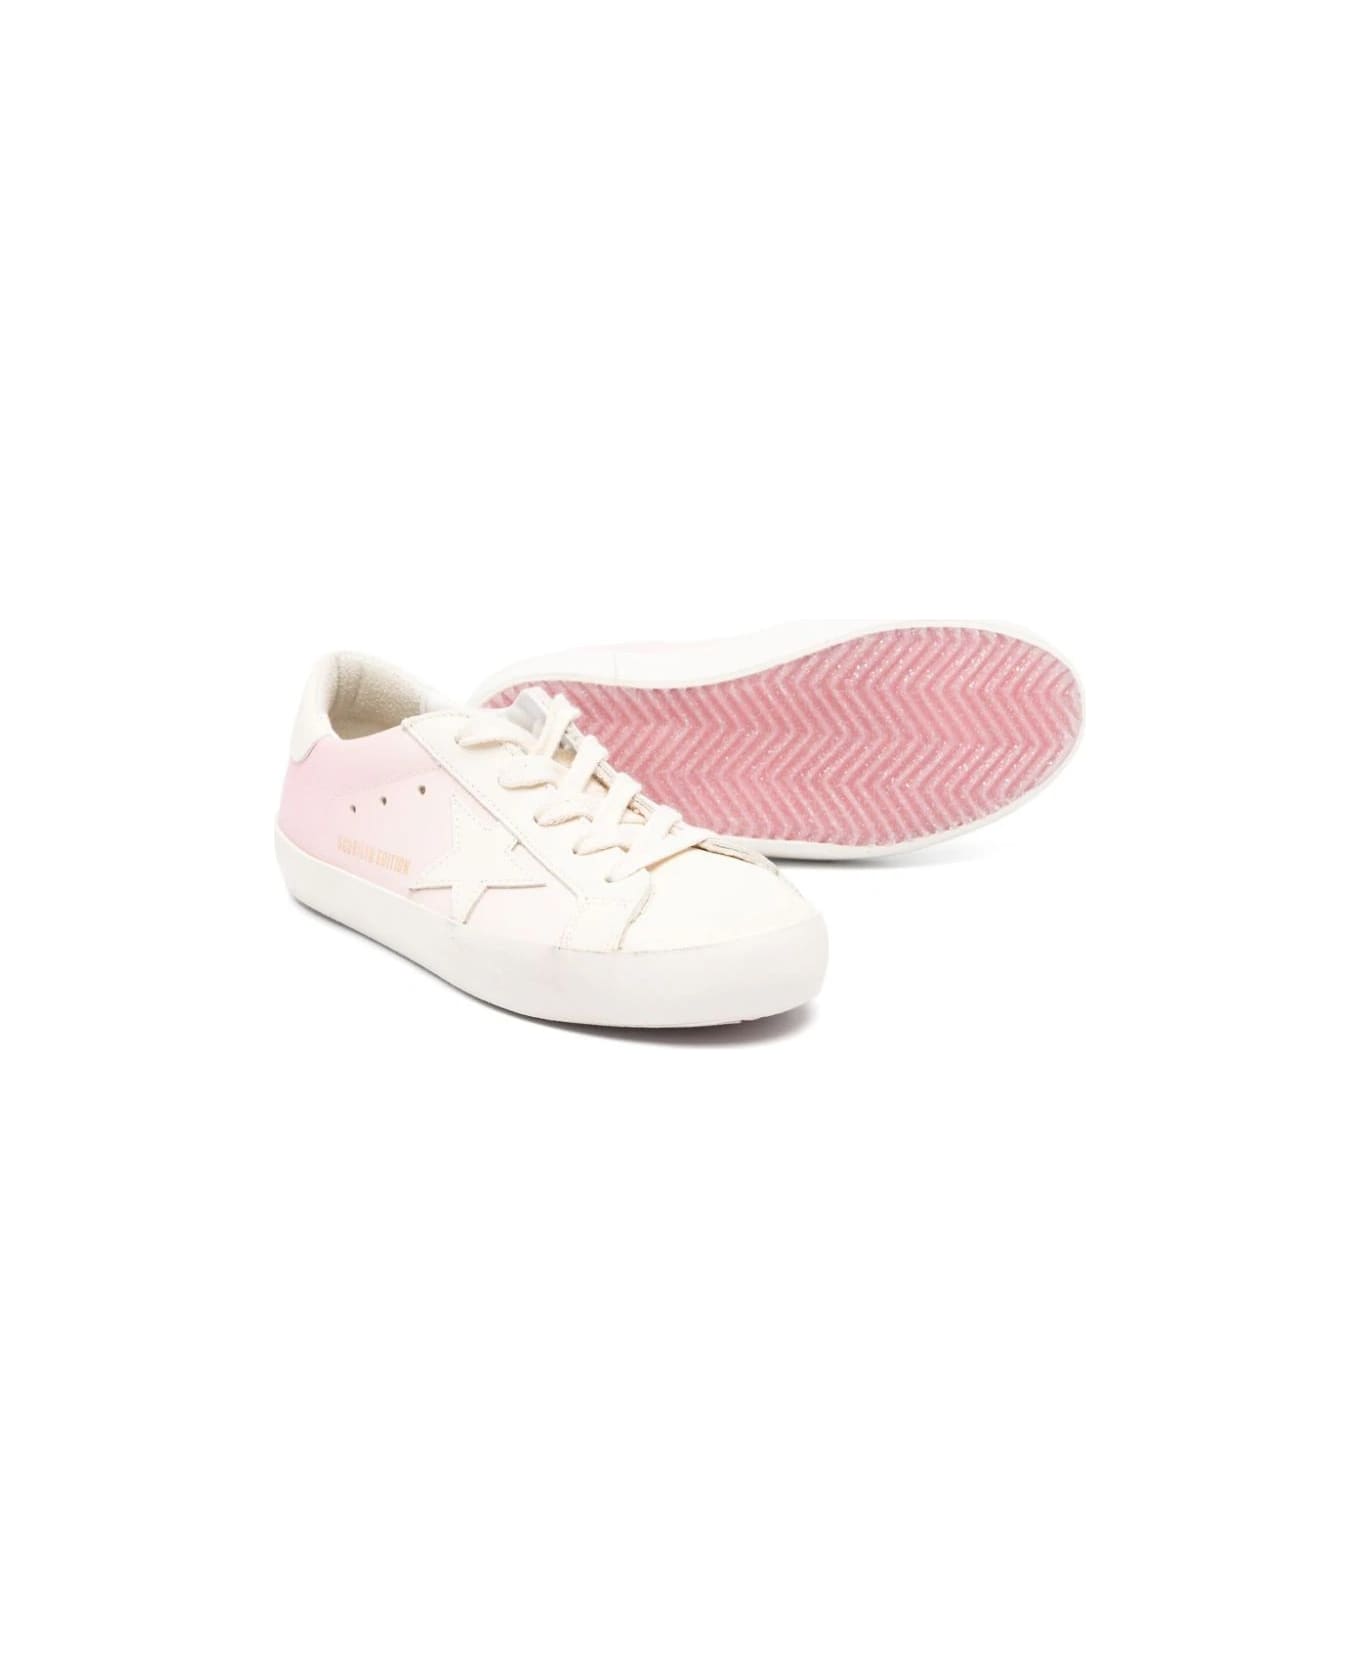 Bonpoint Golden Goose X Bonpoint Sneakers In Strawberry - Pink